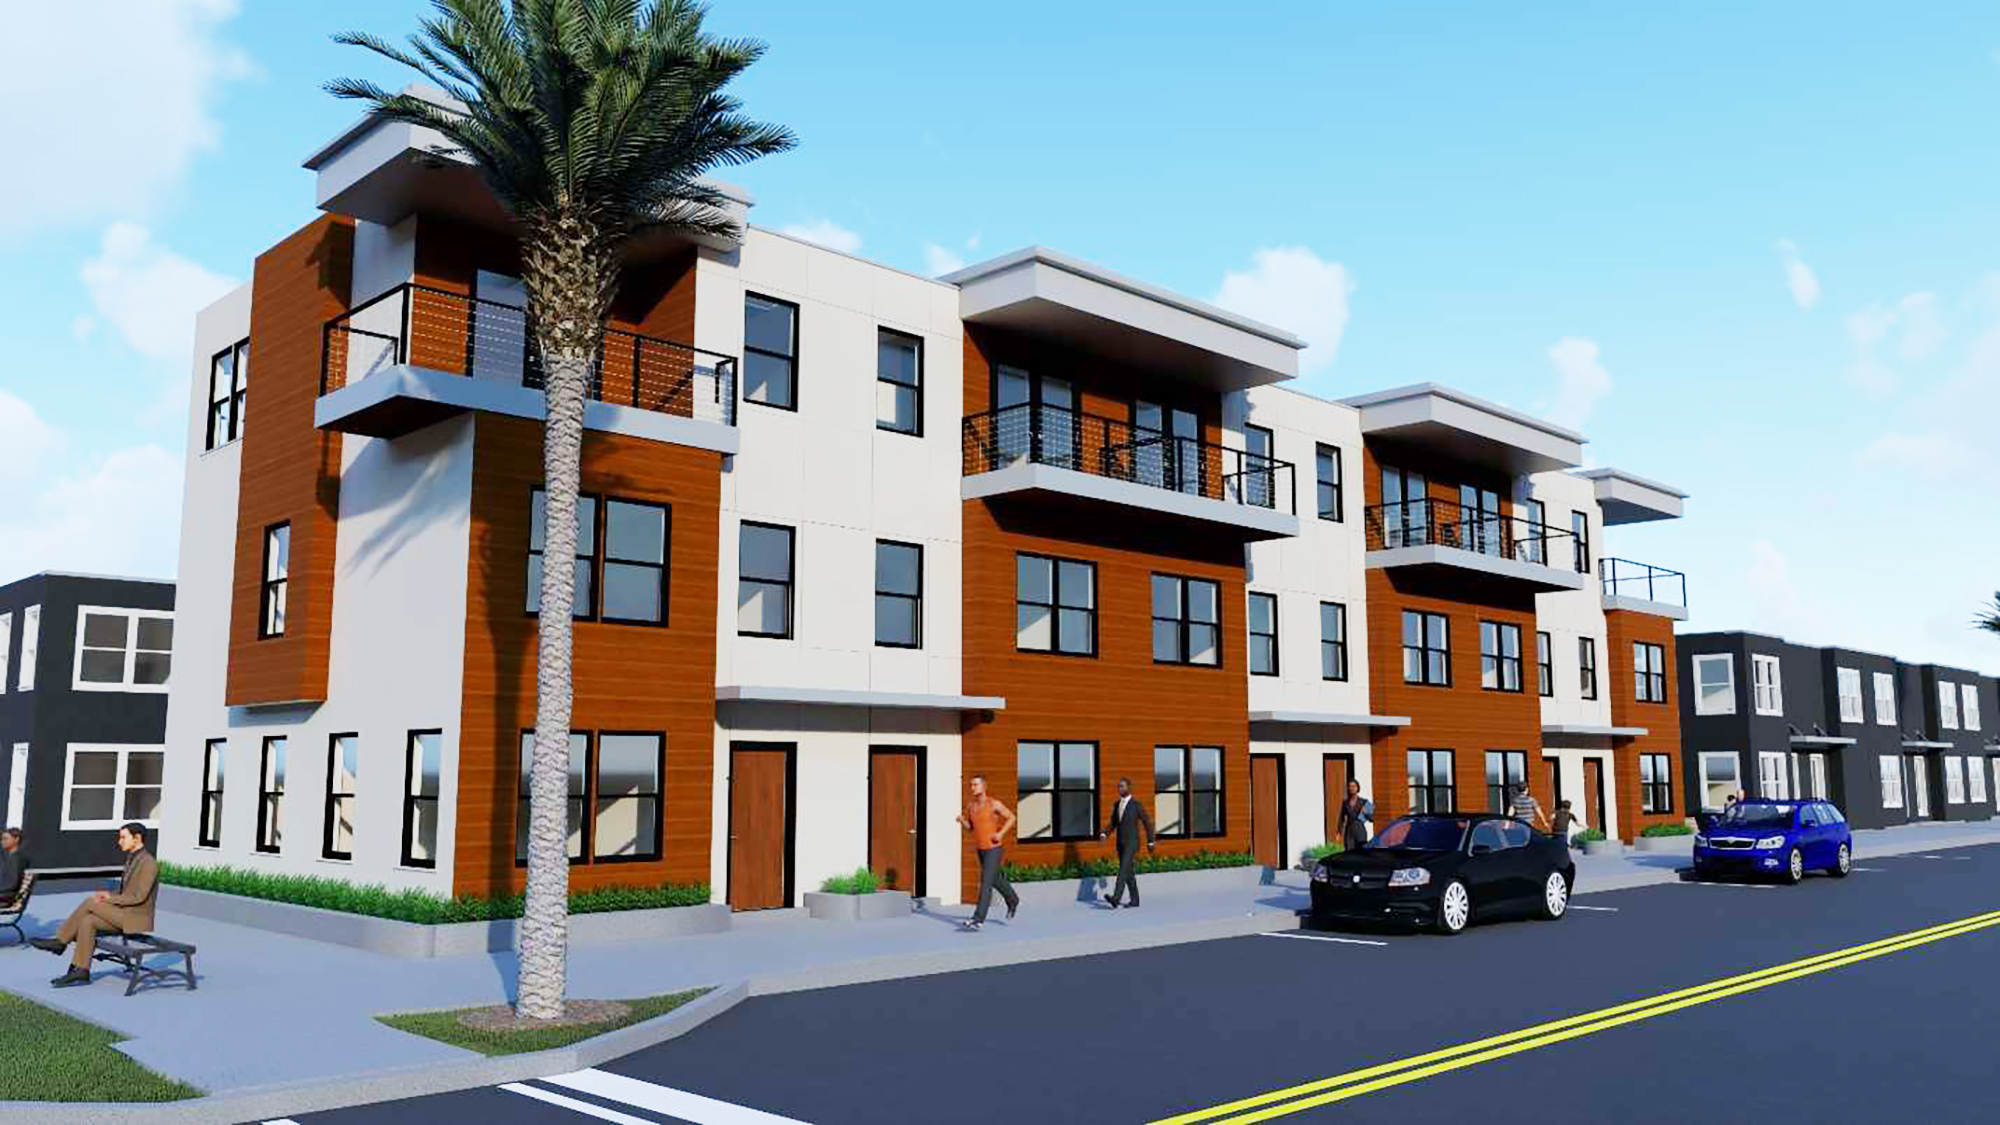 A rendering of the proposed Johnson Commons townhomes on the Forsyth Block